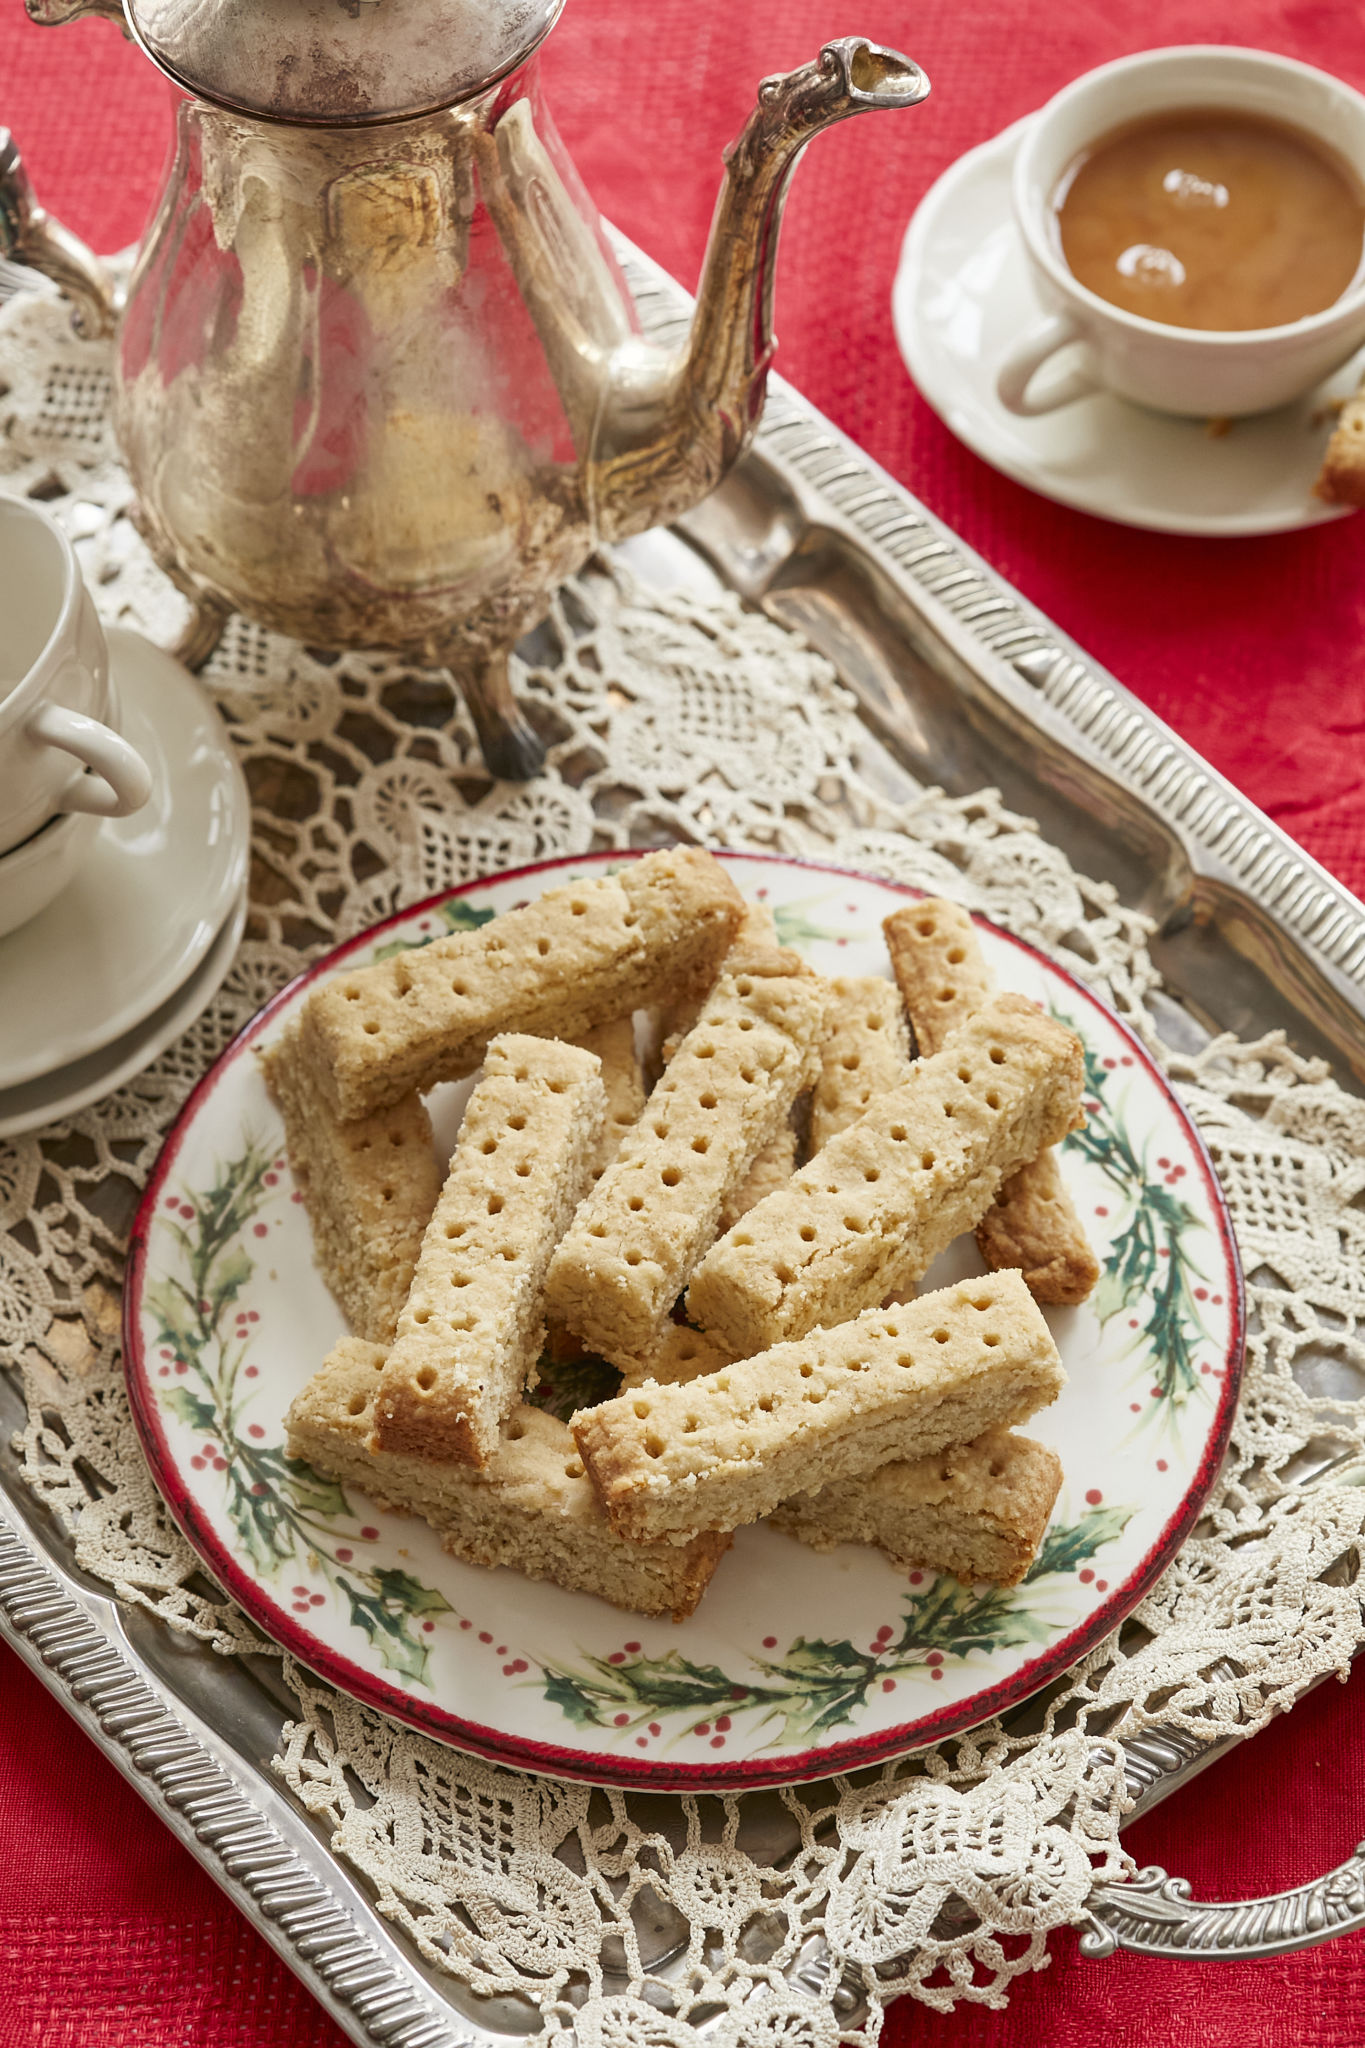 Crumbly Scottish shortbread cookies are served on a Christmas plate, decorated with holly berries, on a platter alongside two mugs and a silver decorative teapot.